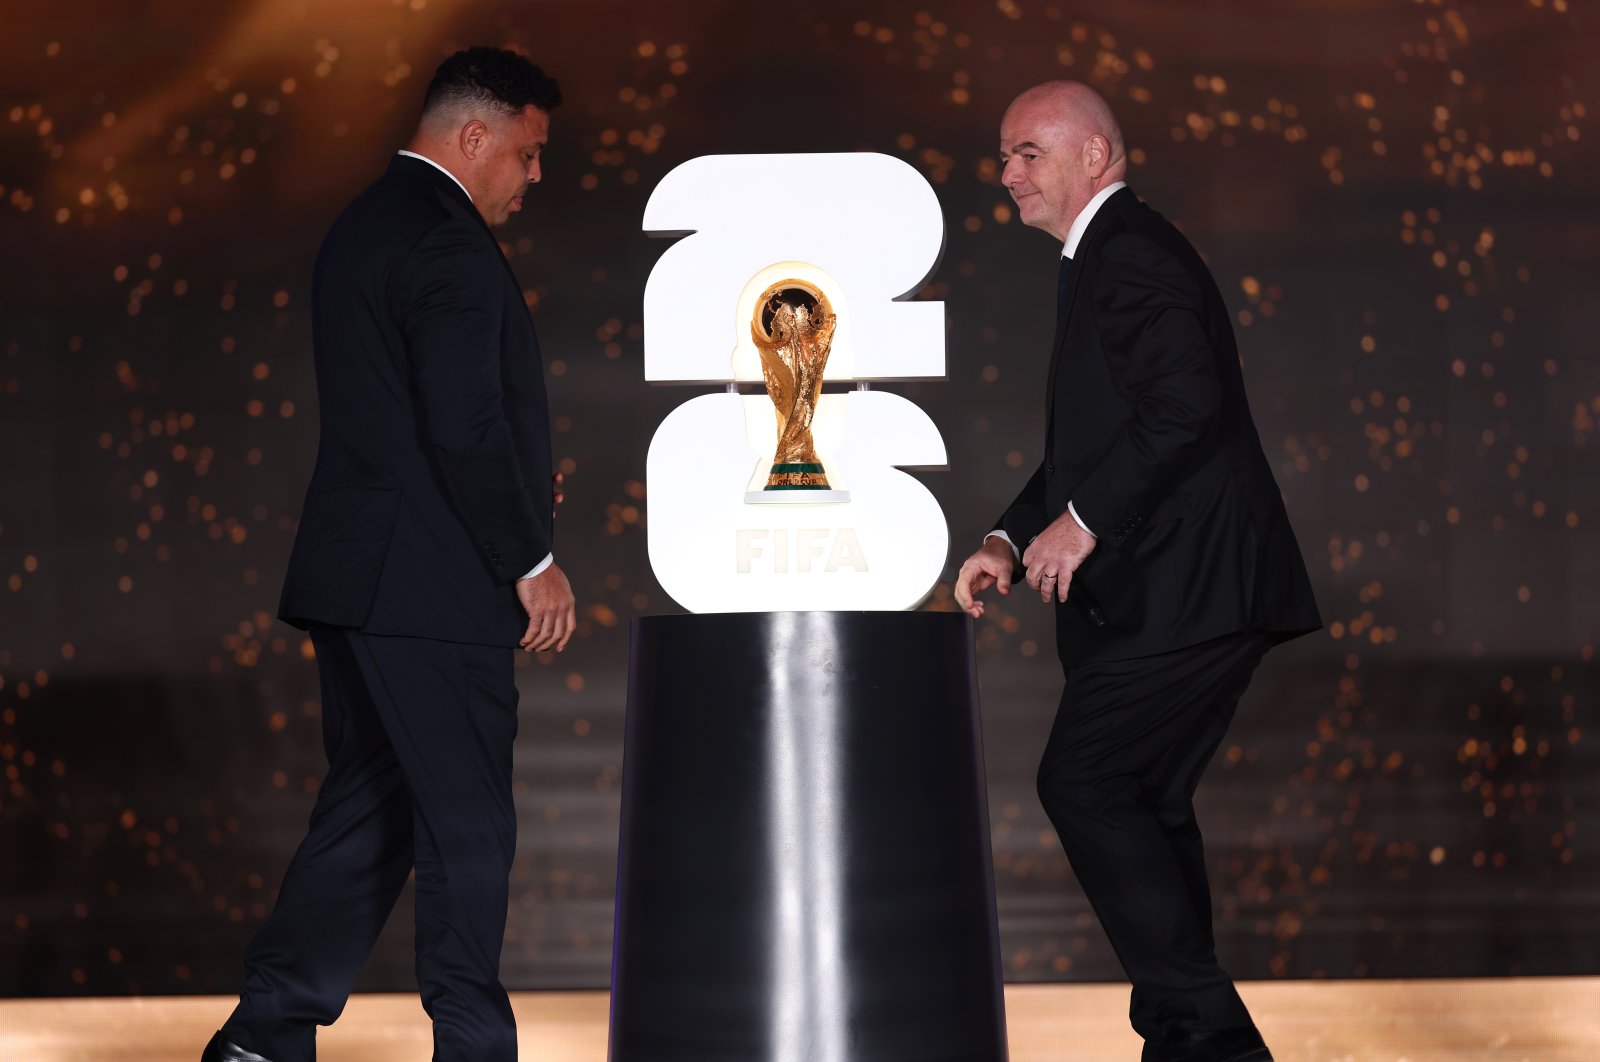 Ronaldo (L) and FIFA President Gianni Infantino onstage during the FIFA World Cup 2026 Official Brand Launch at the Griffiths Observatory, Los Angeles, U.S., May 17, 2023. (Getty Images Photo)